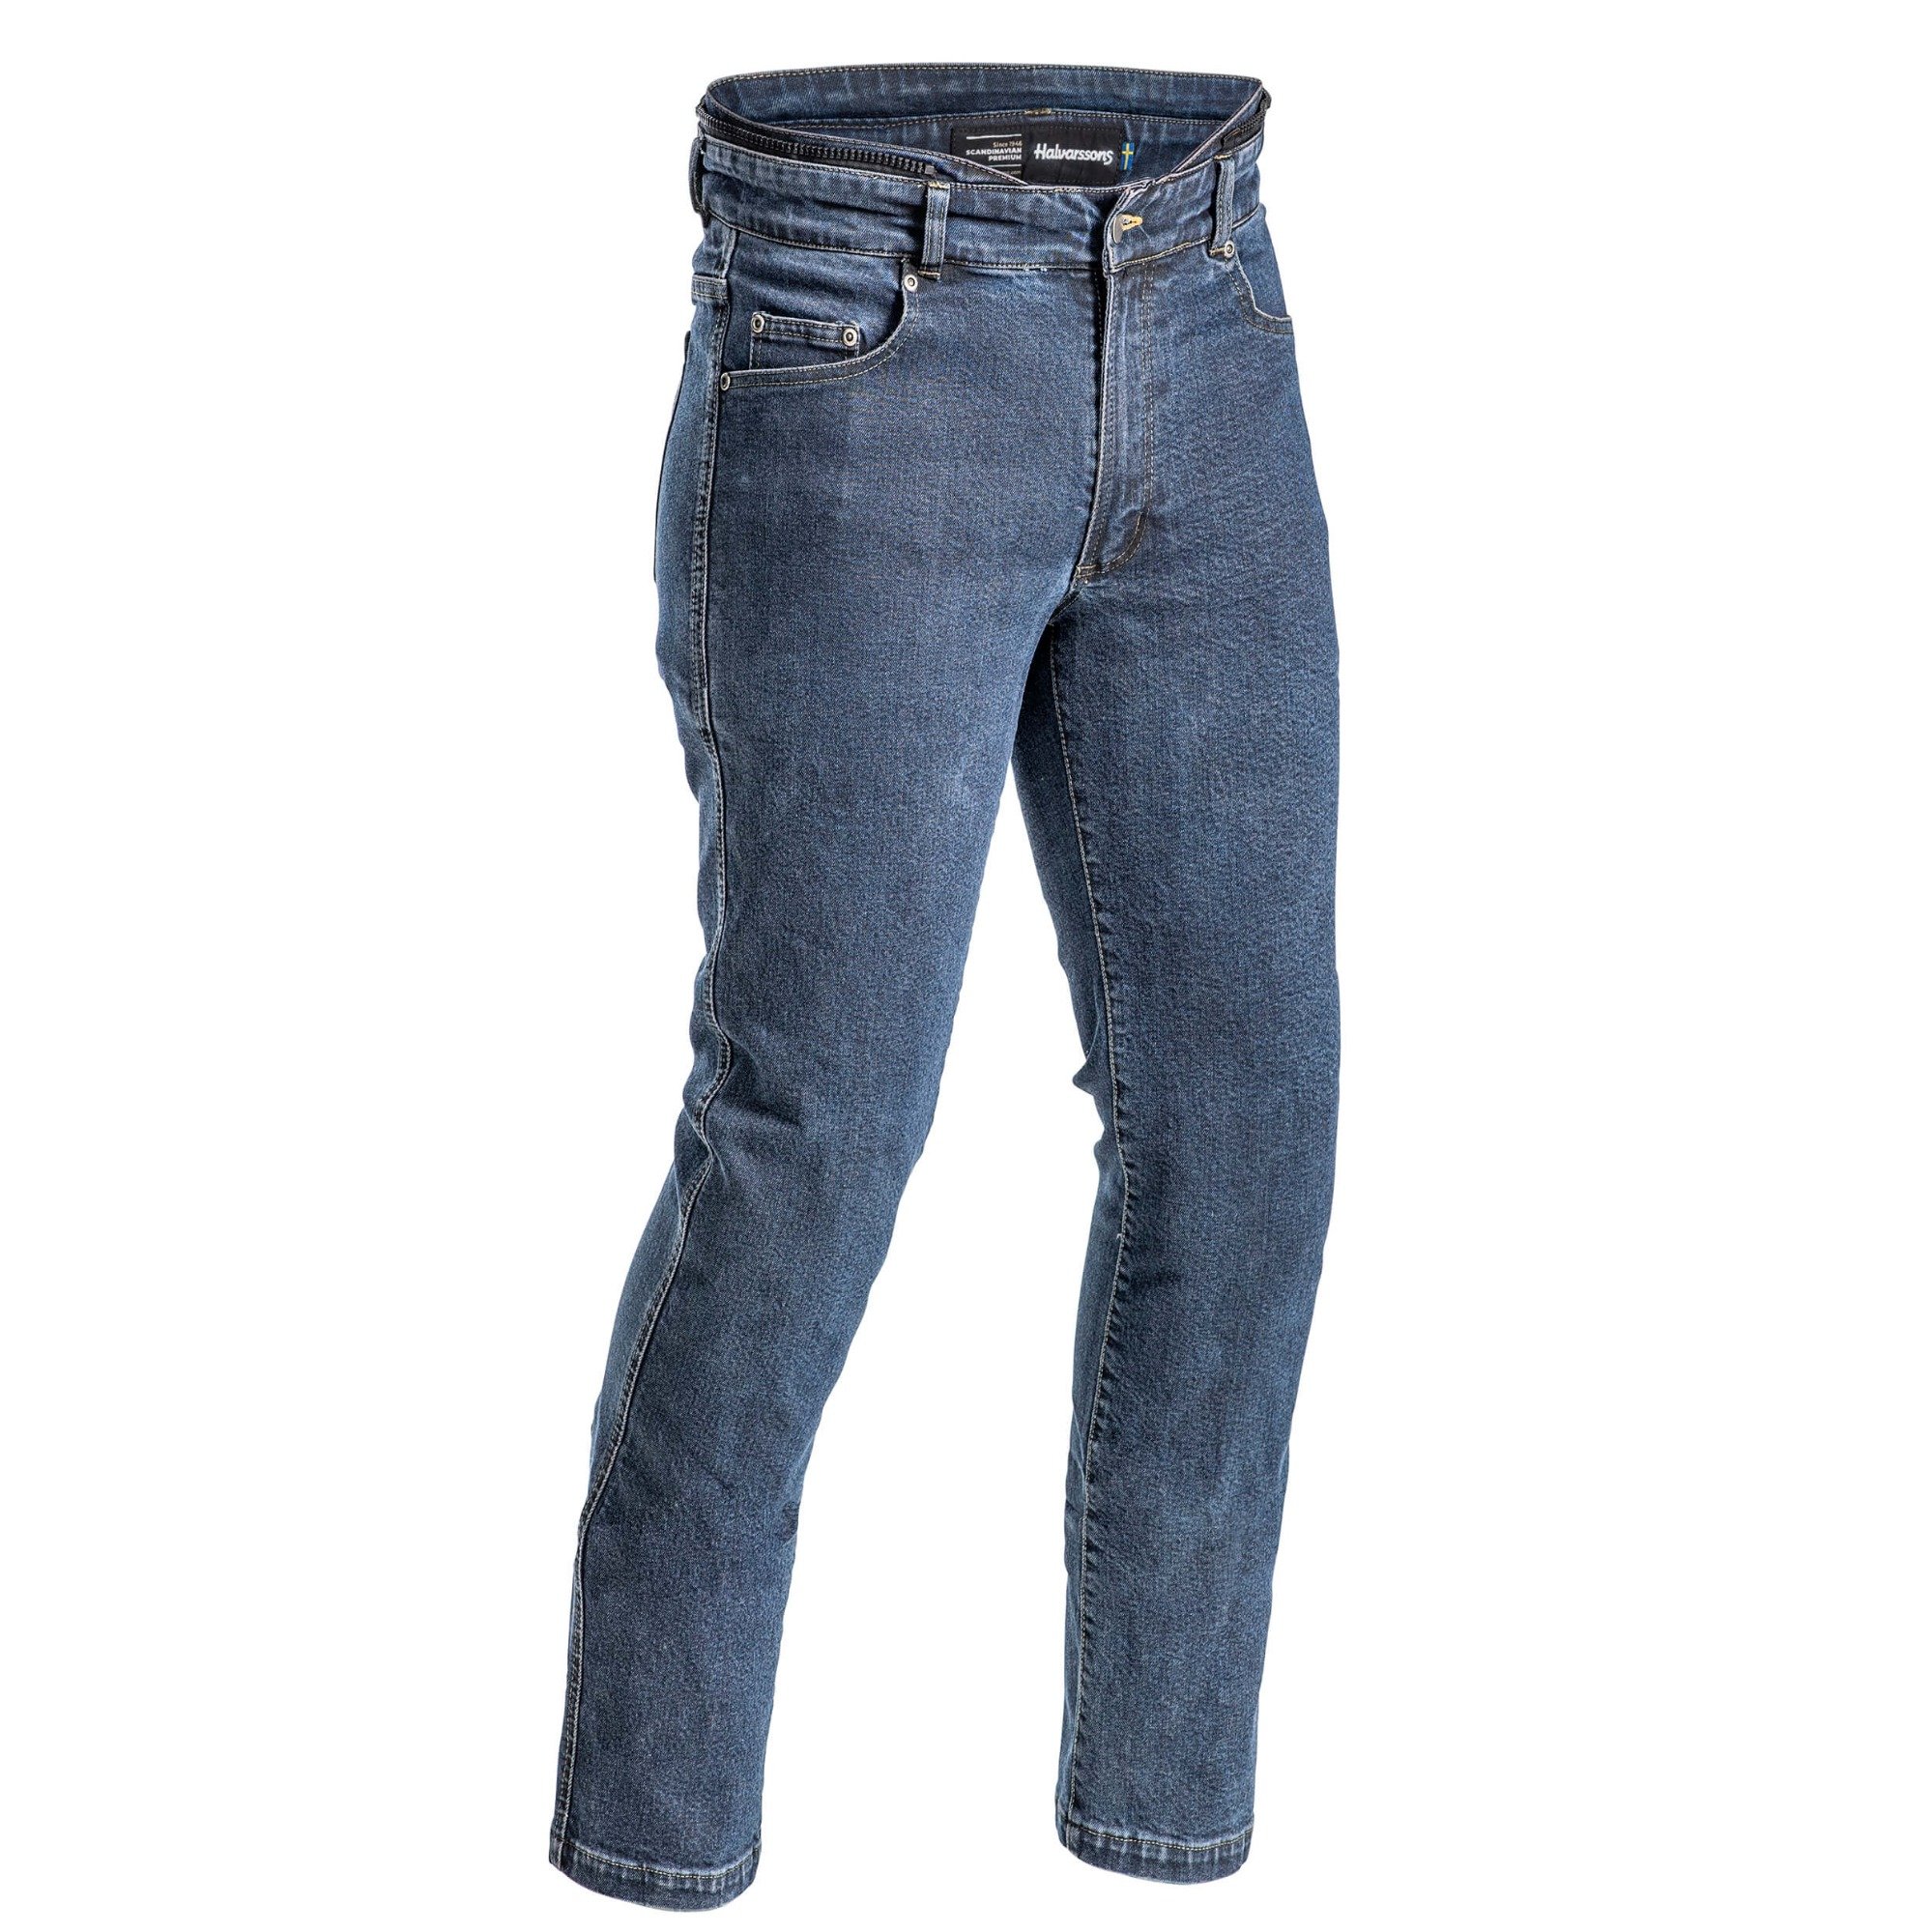 Image of Halvarssons Jeans Rogen Blue Size 46 ID 6438235238945